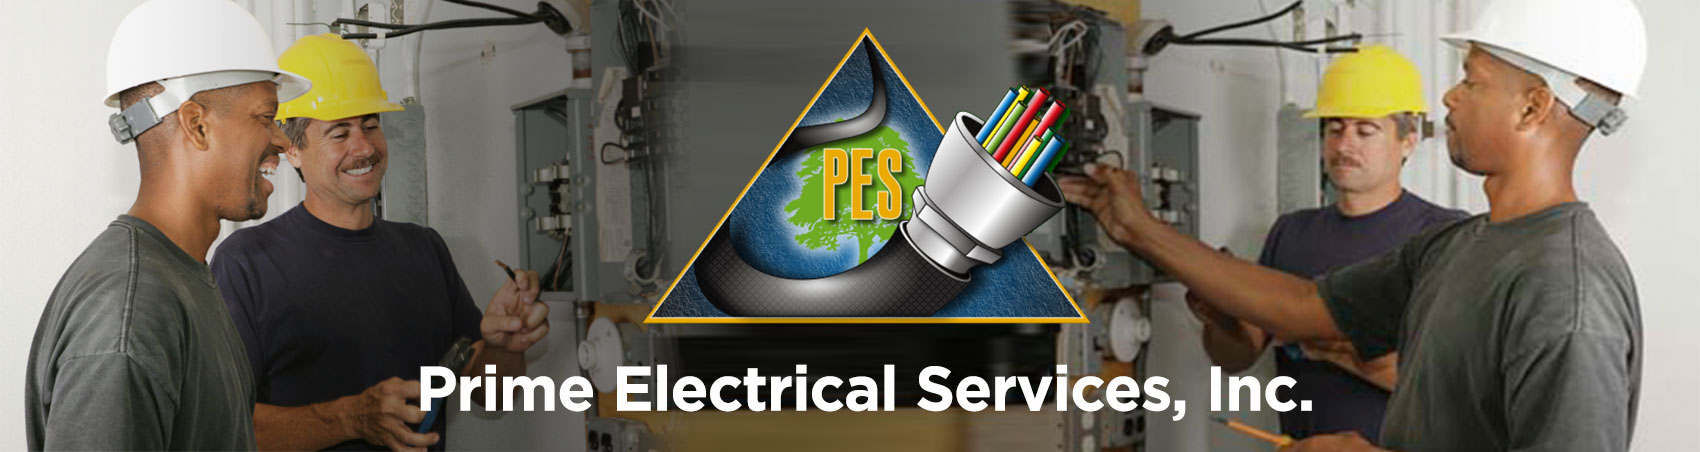 Electrical Contracting Services Prime Electrical Services, Inc.